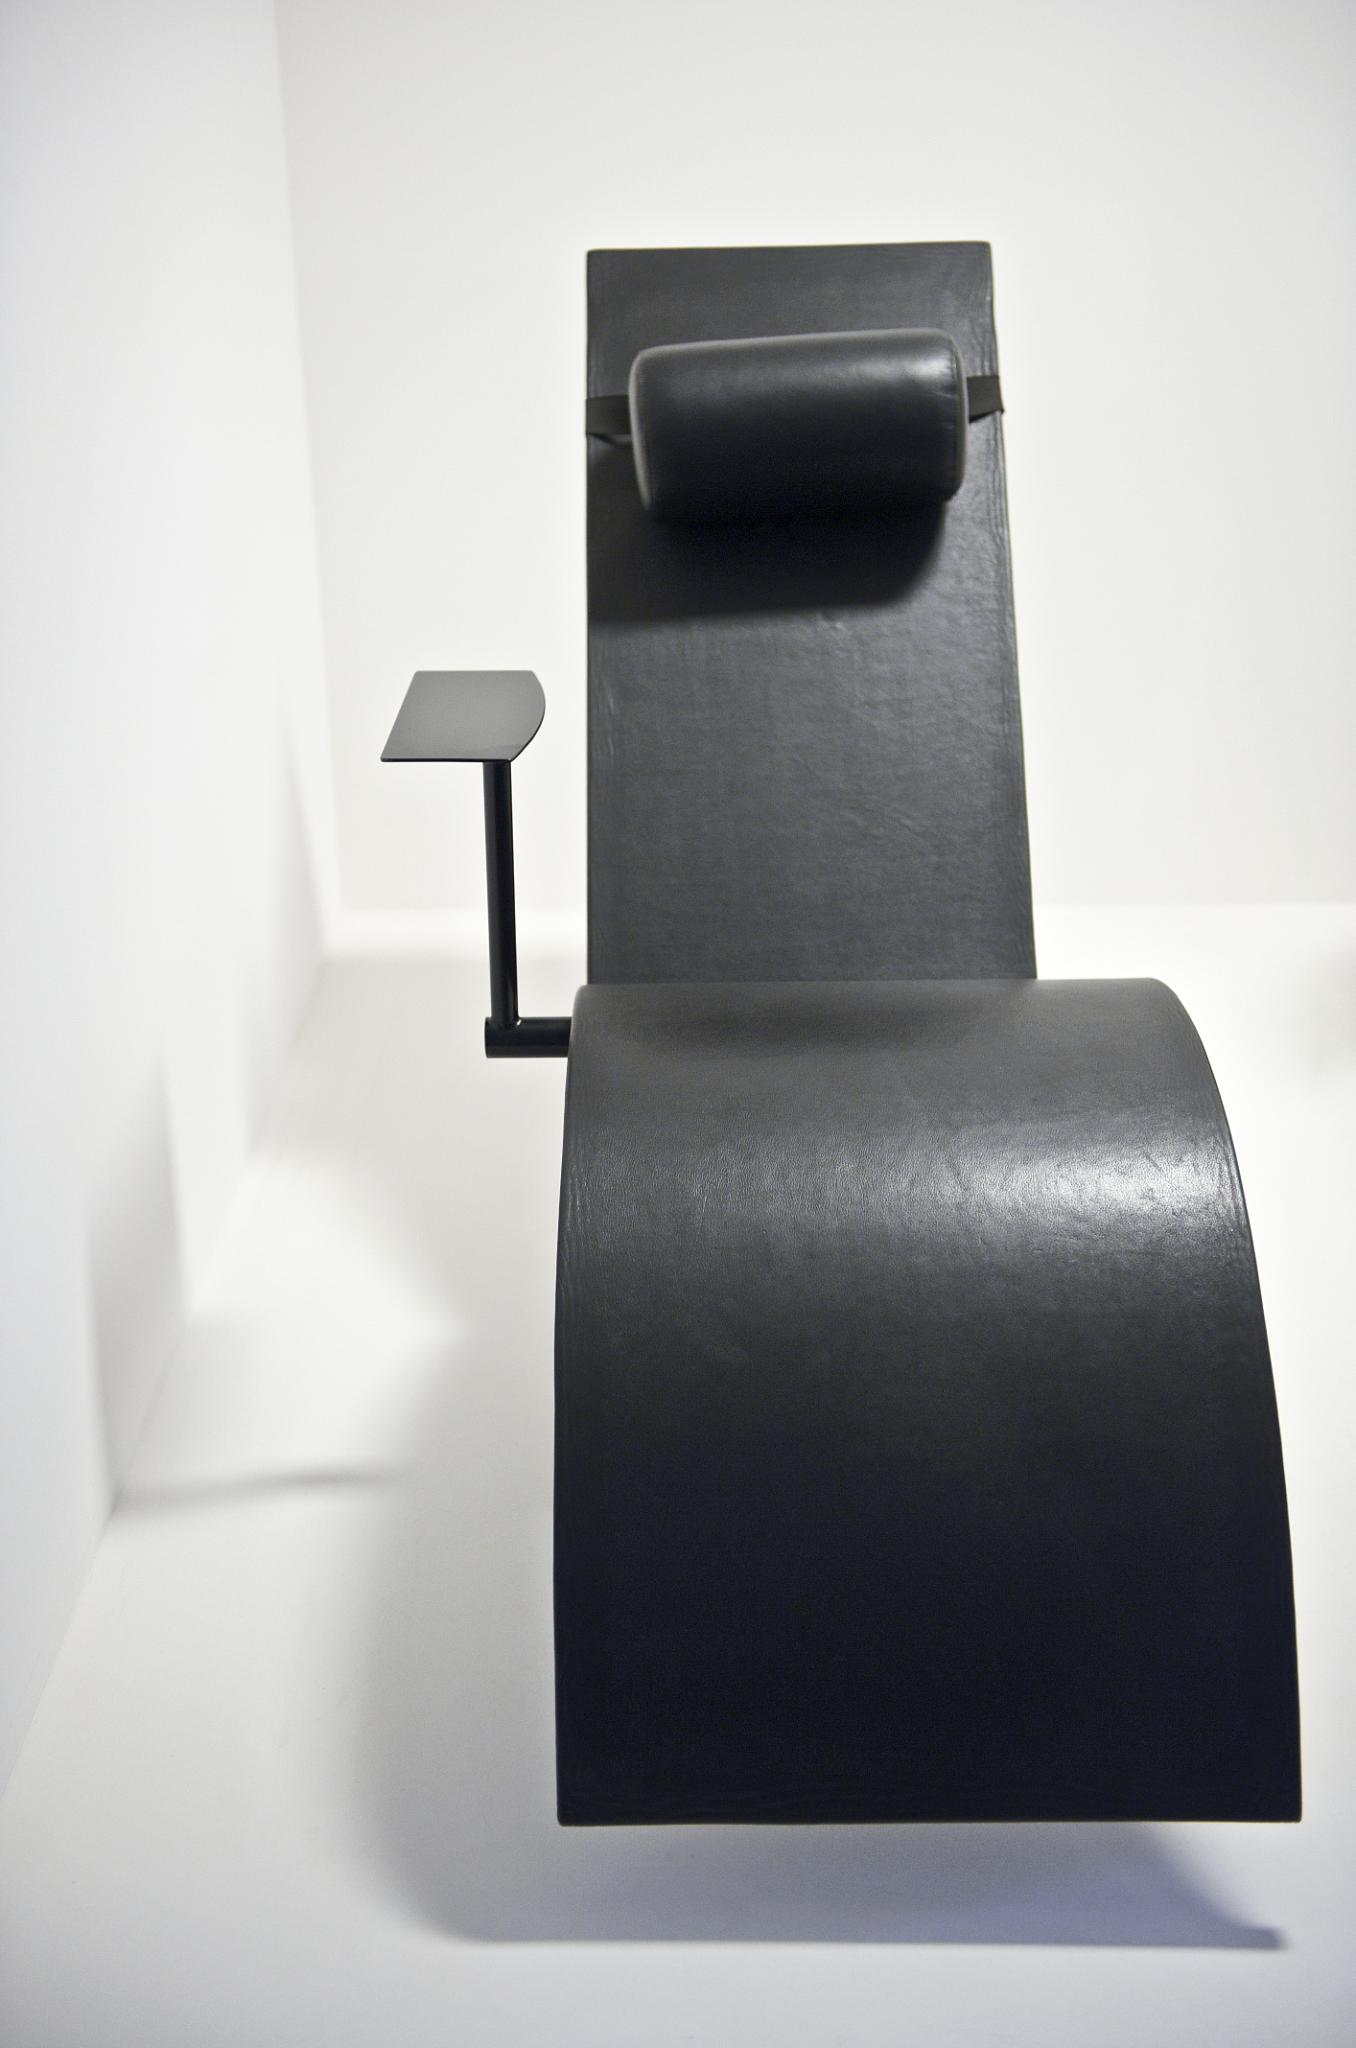 the chair is made with black leather, and has a square leg